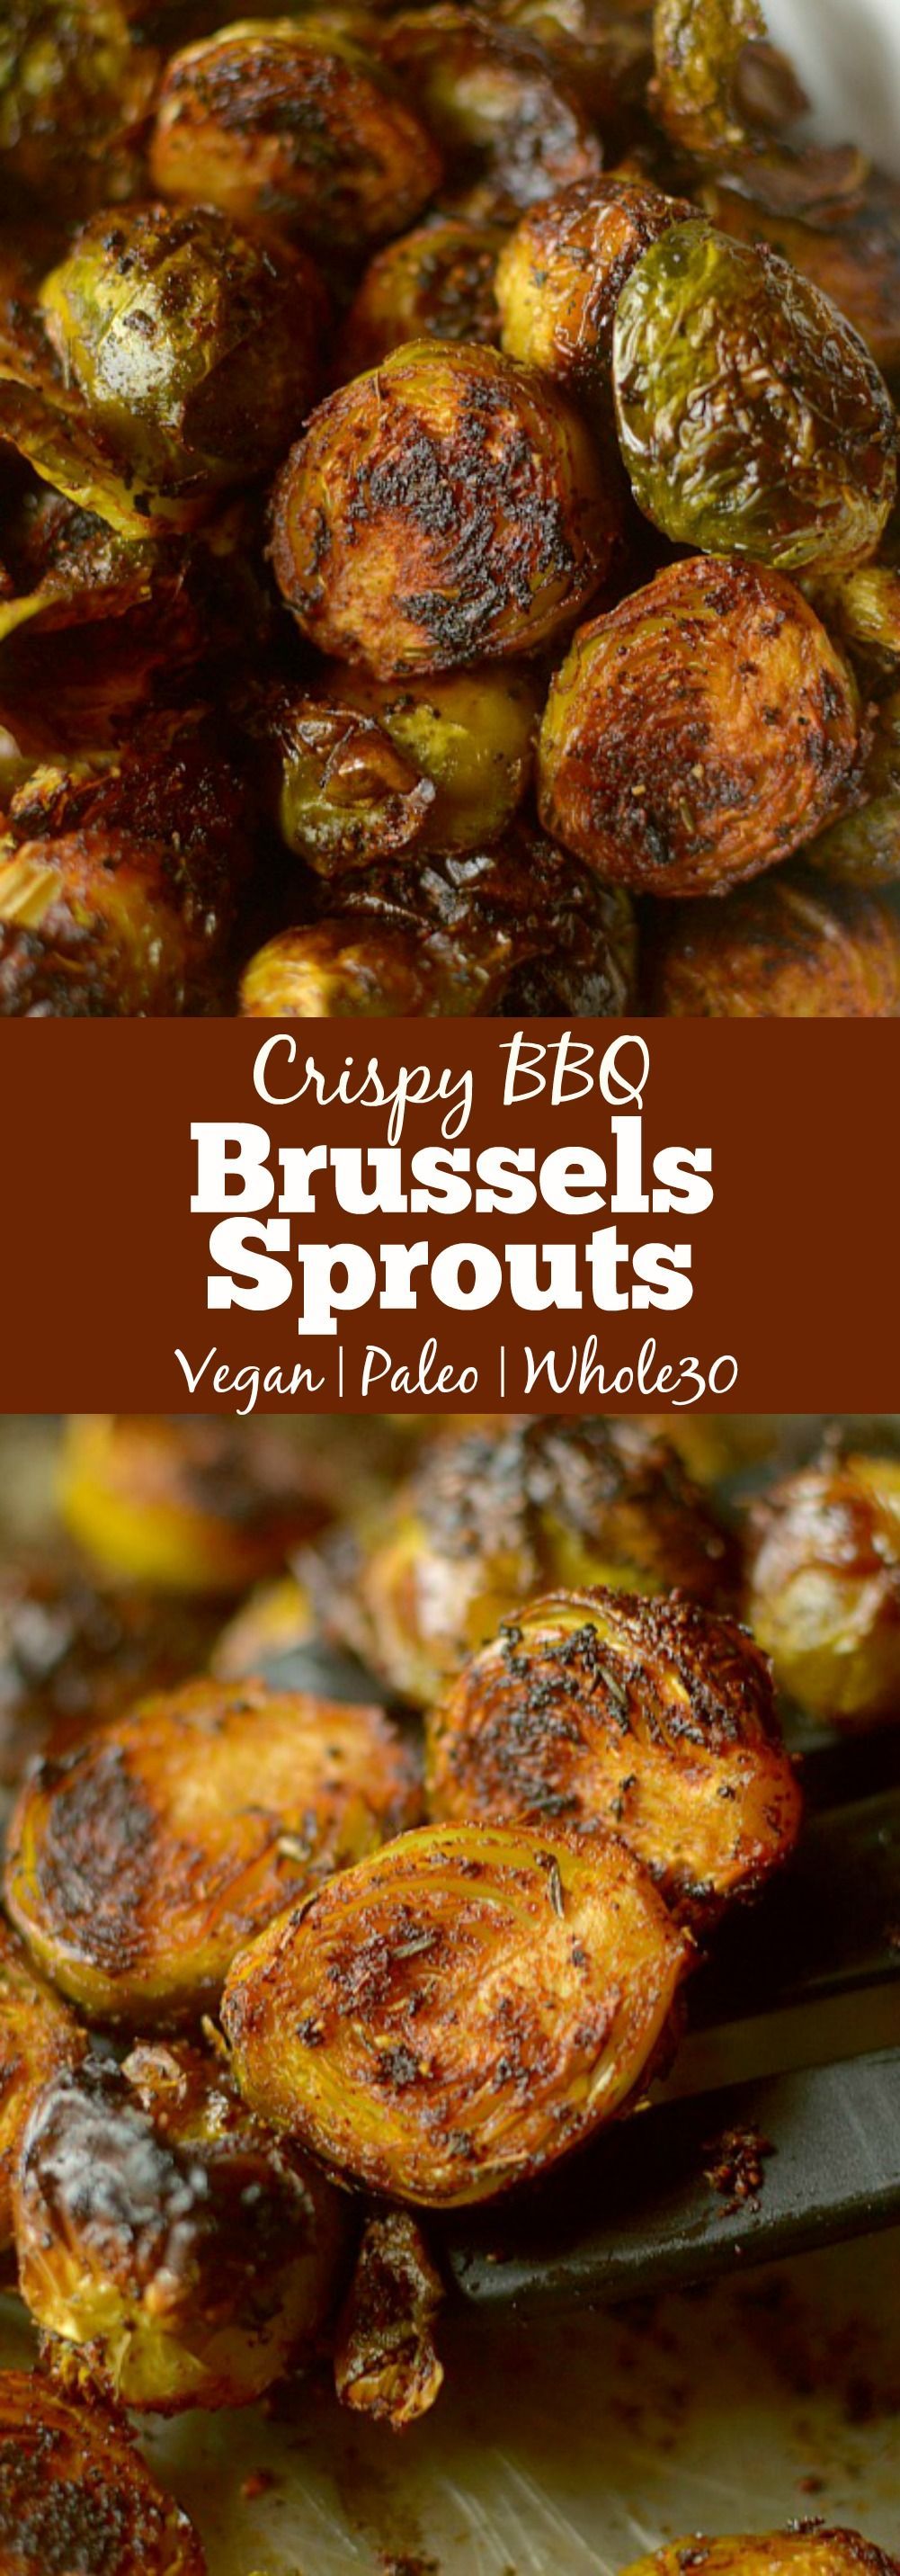 These Crispy Barbecue Spiced Brussels Sprouts are a tasty + addicting side dish that anyone will love, even brussels sprouts